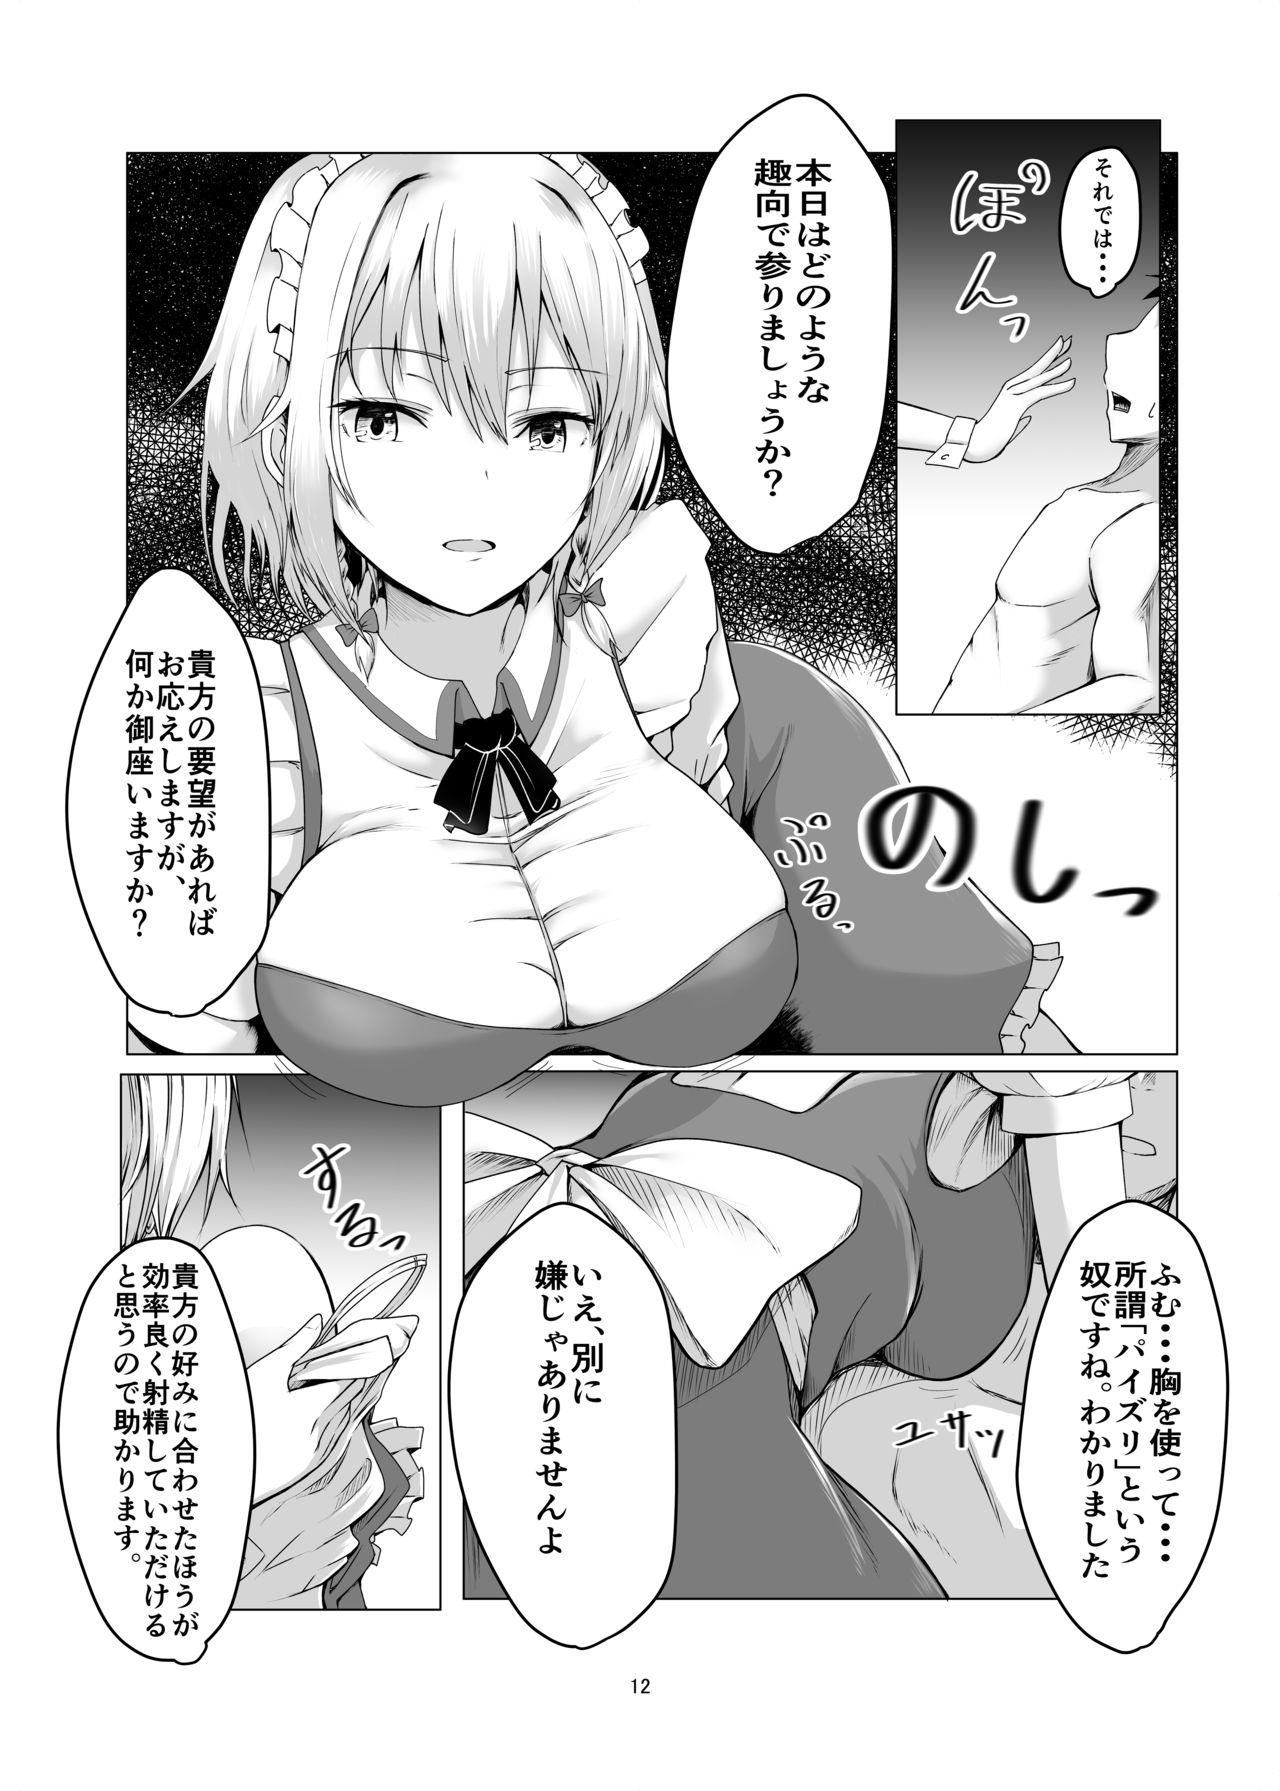 Cream 咲夜さんに淡々と搾精されるマンガ - Touhou project Transsexual - Page 11